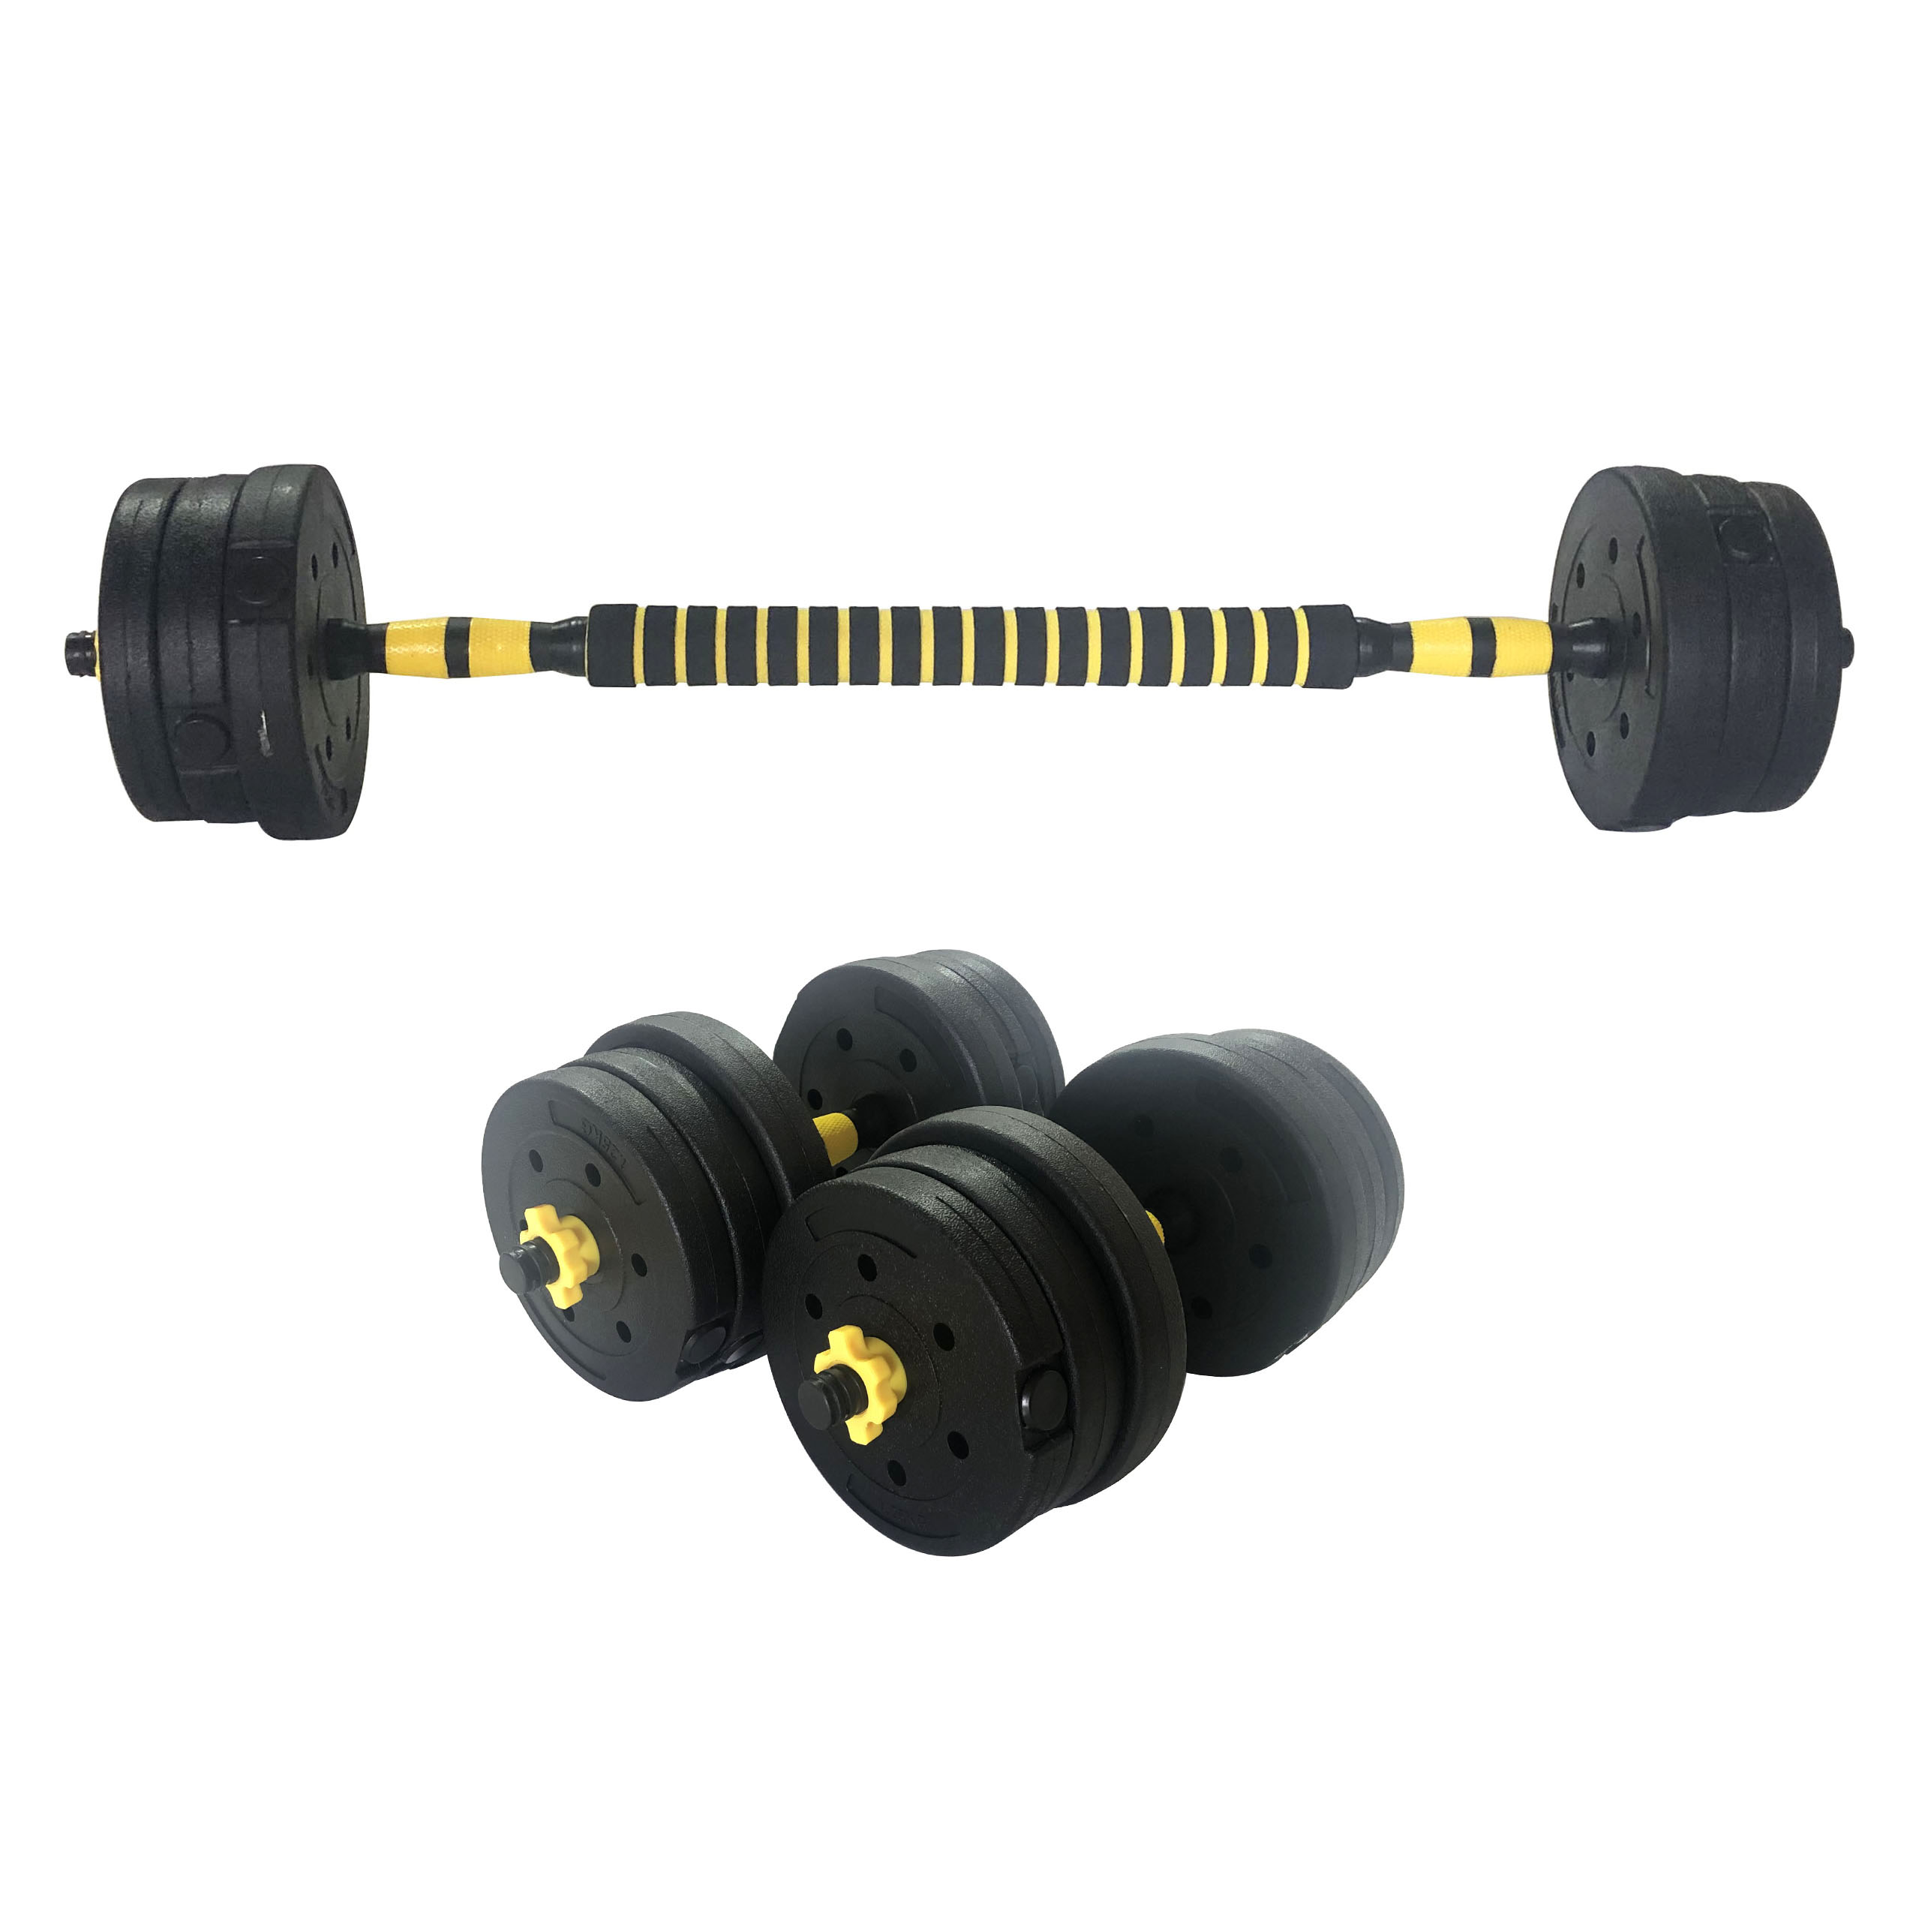 Wholesale Environmental Protect Cement Adjustable Dumbbell 10kg 15kg 20kg 30kg 40kg Barbell Dumbbells Set